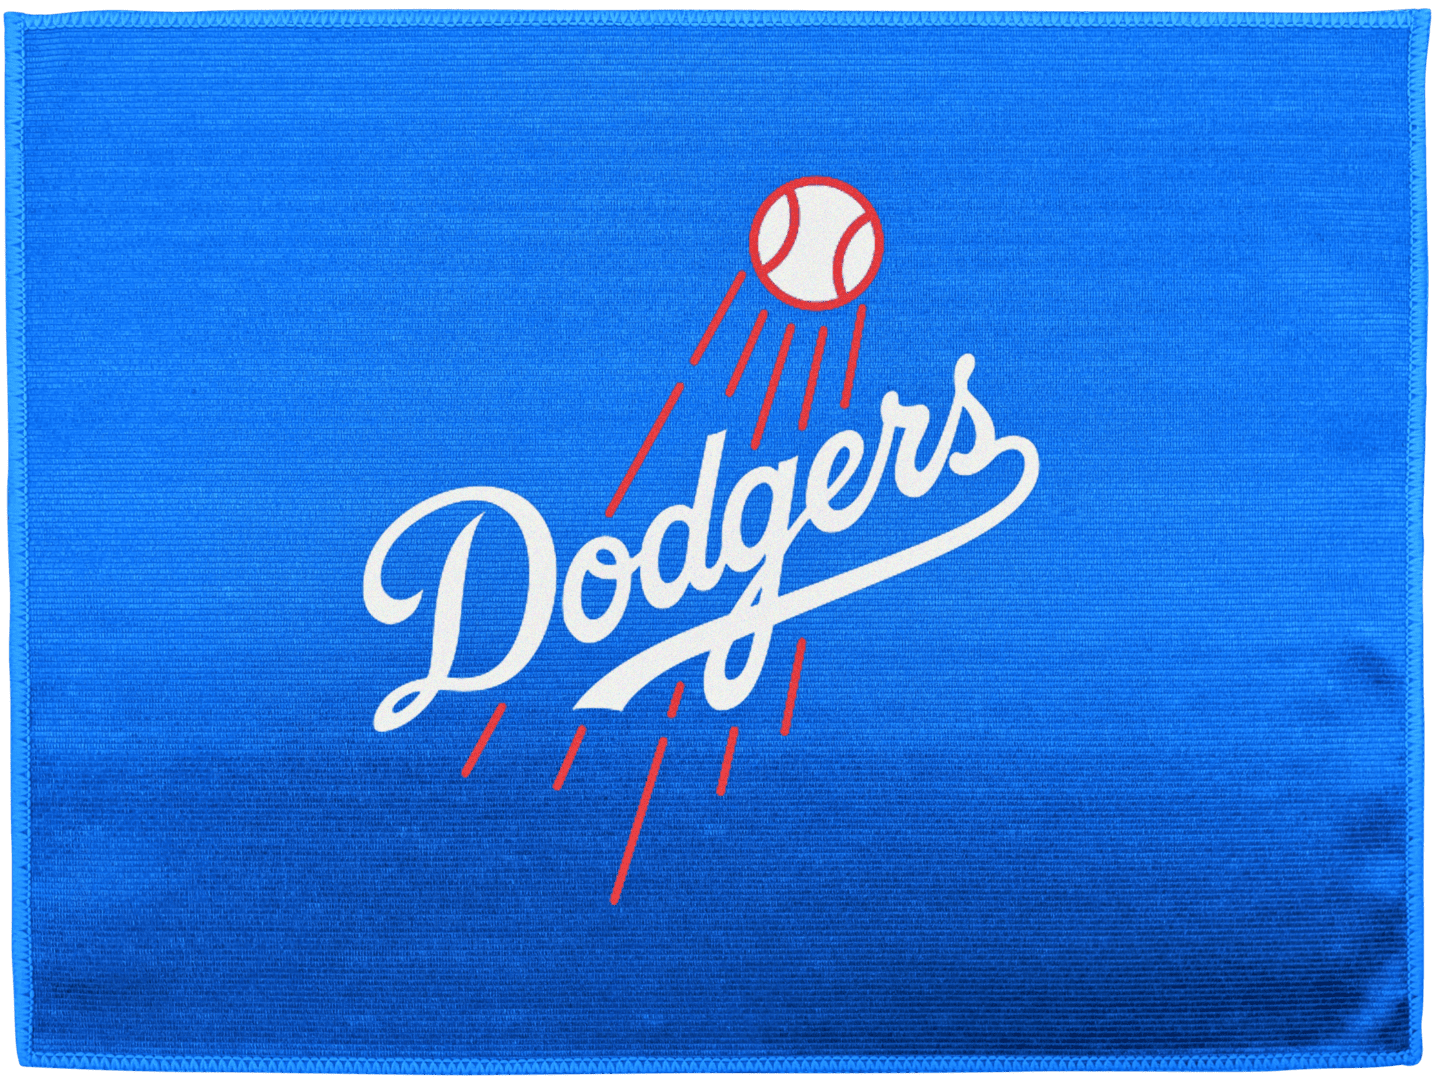 Dodgers text on blue color cloth